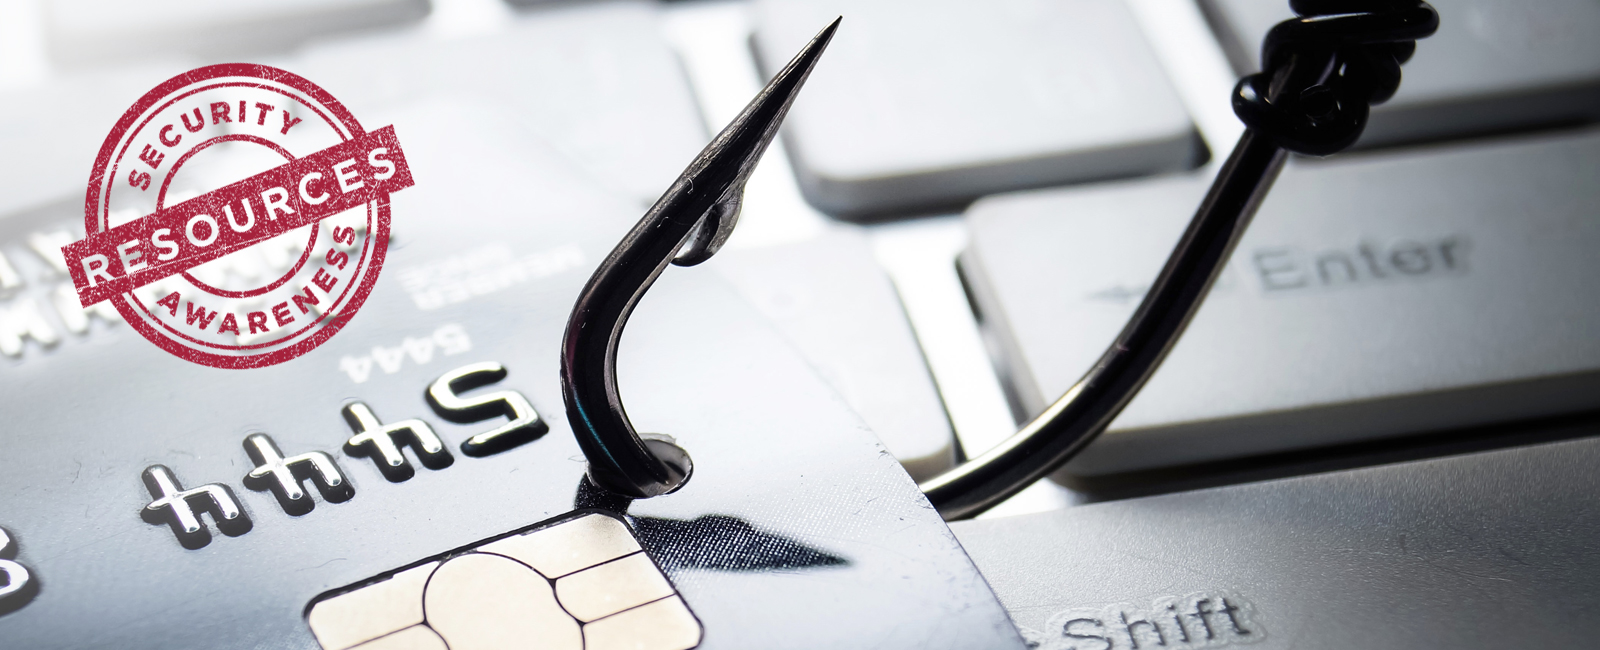 photo of credit card caught on a fishhook